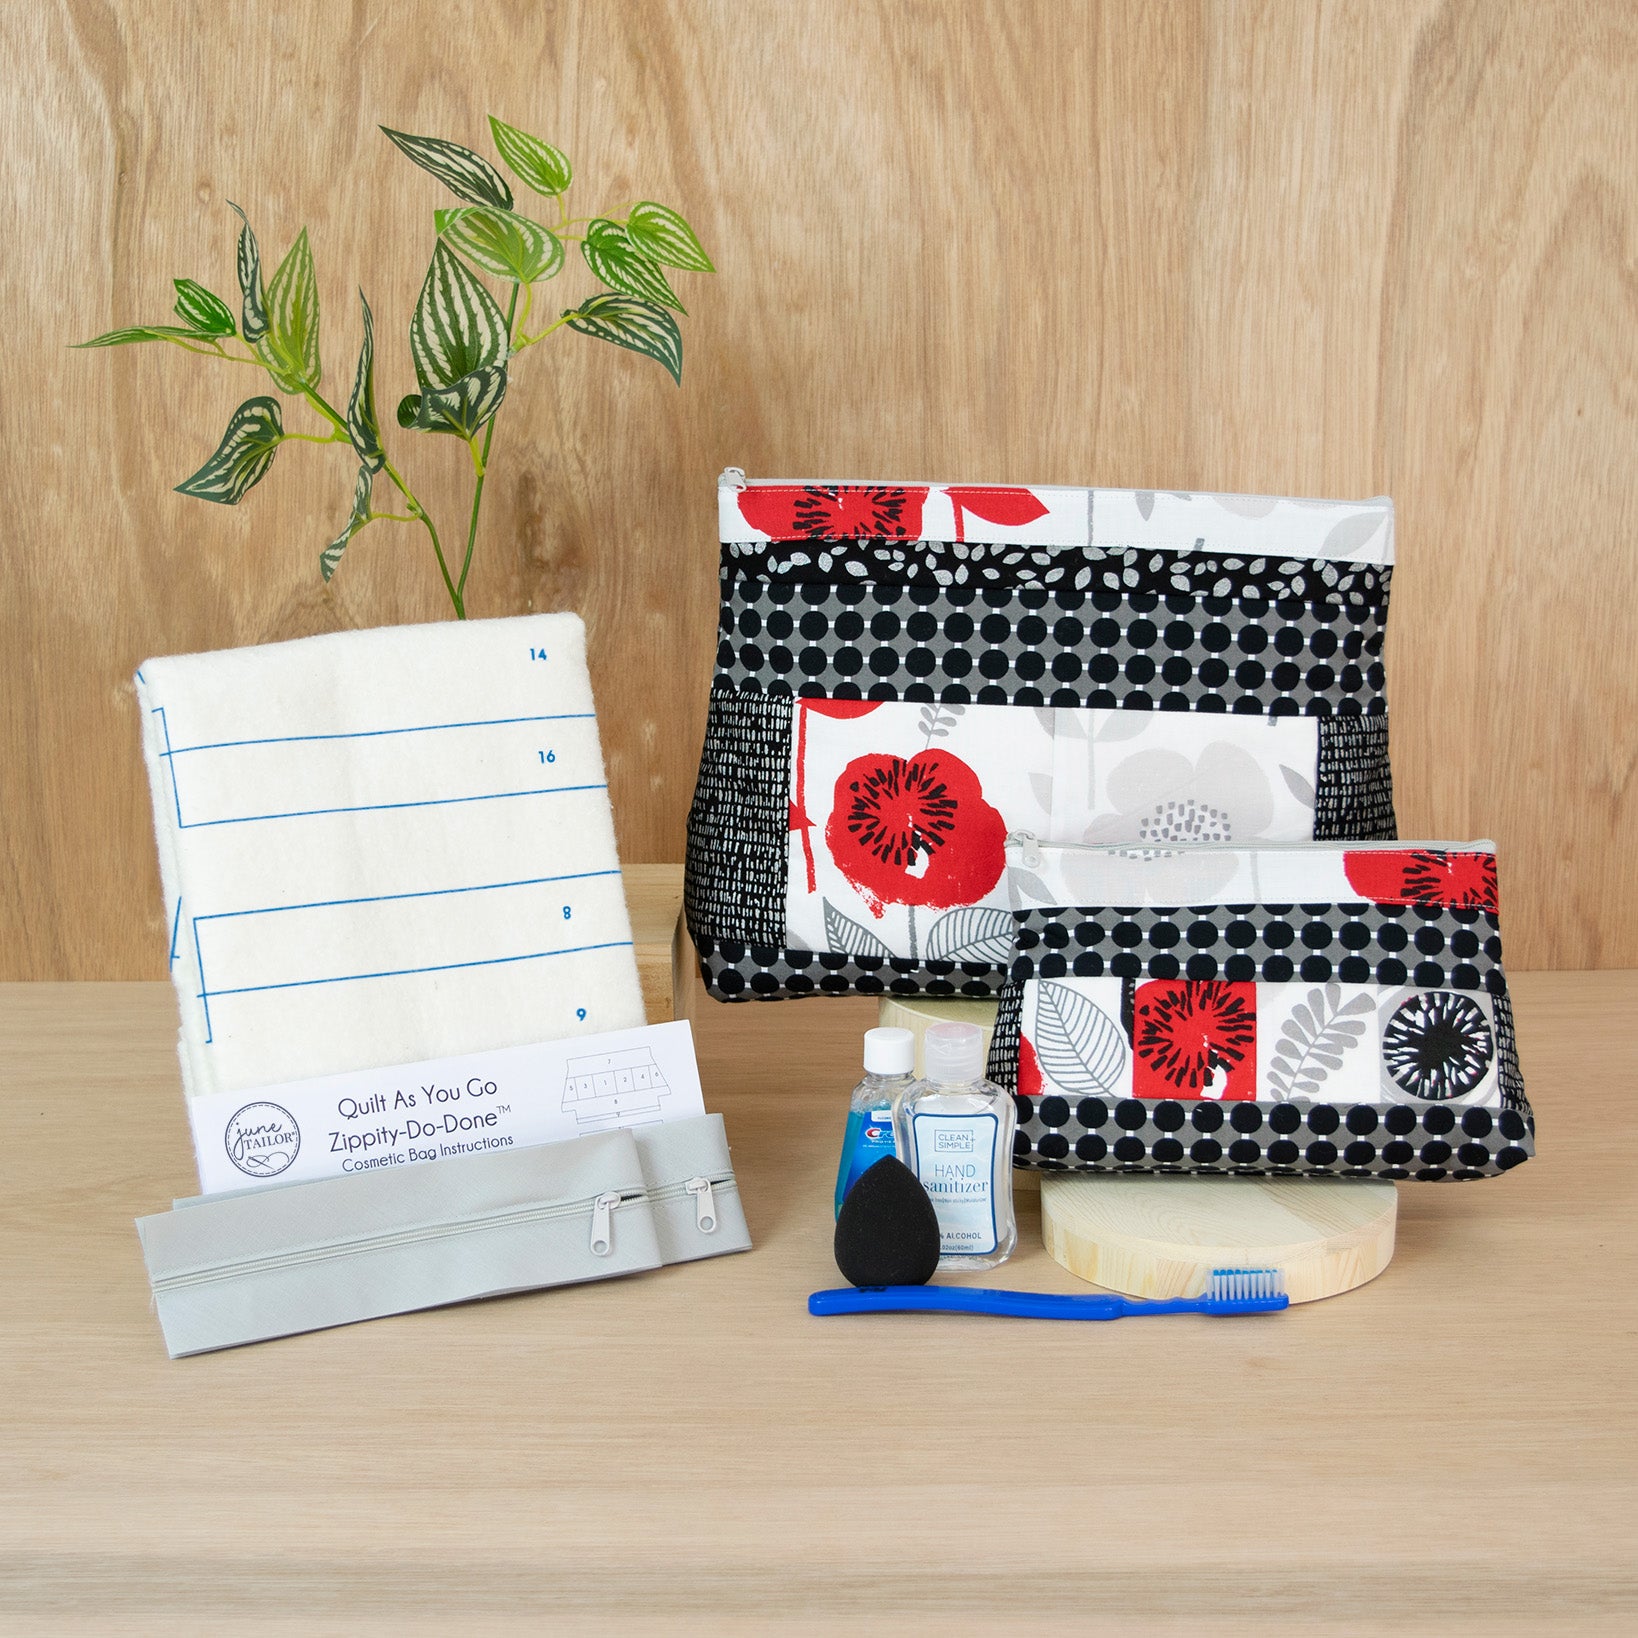 2023 June Tailor Collection-Zippity Do Done™ Cosmetic Bags (2) - QAYG LtGray zip-Kits with Zippity-Do-Done™